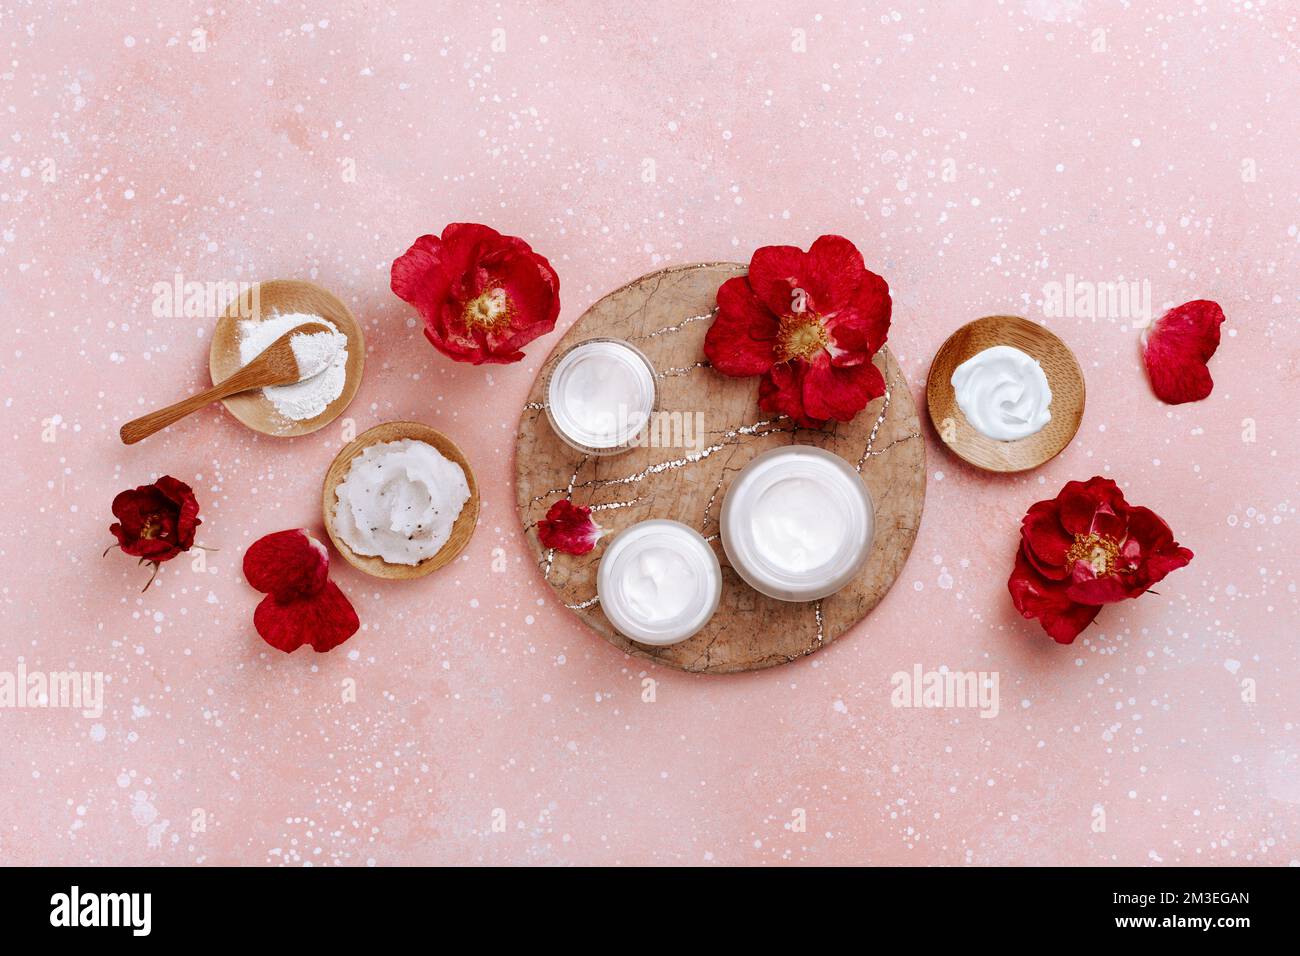 skincare products and dog rose flowers. natural cosmetics for home spa treatment Stock Photo